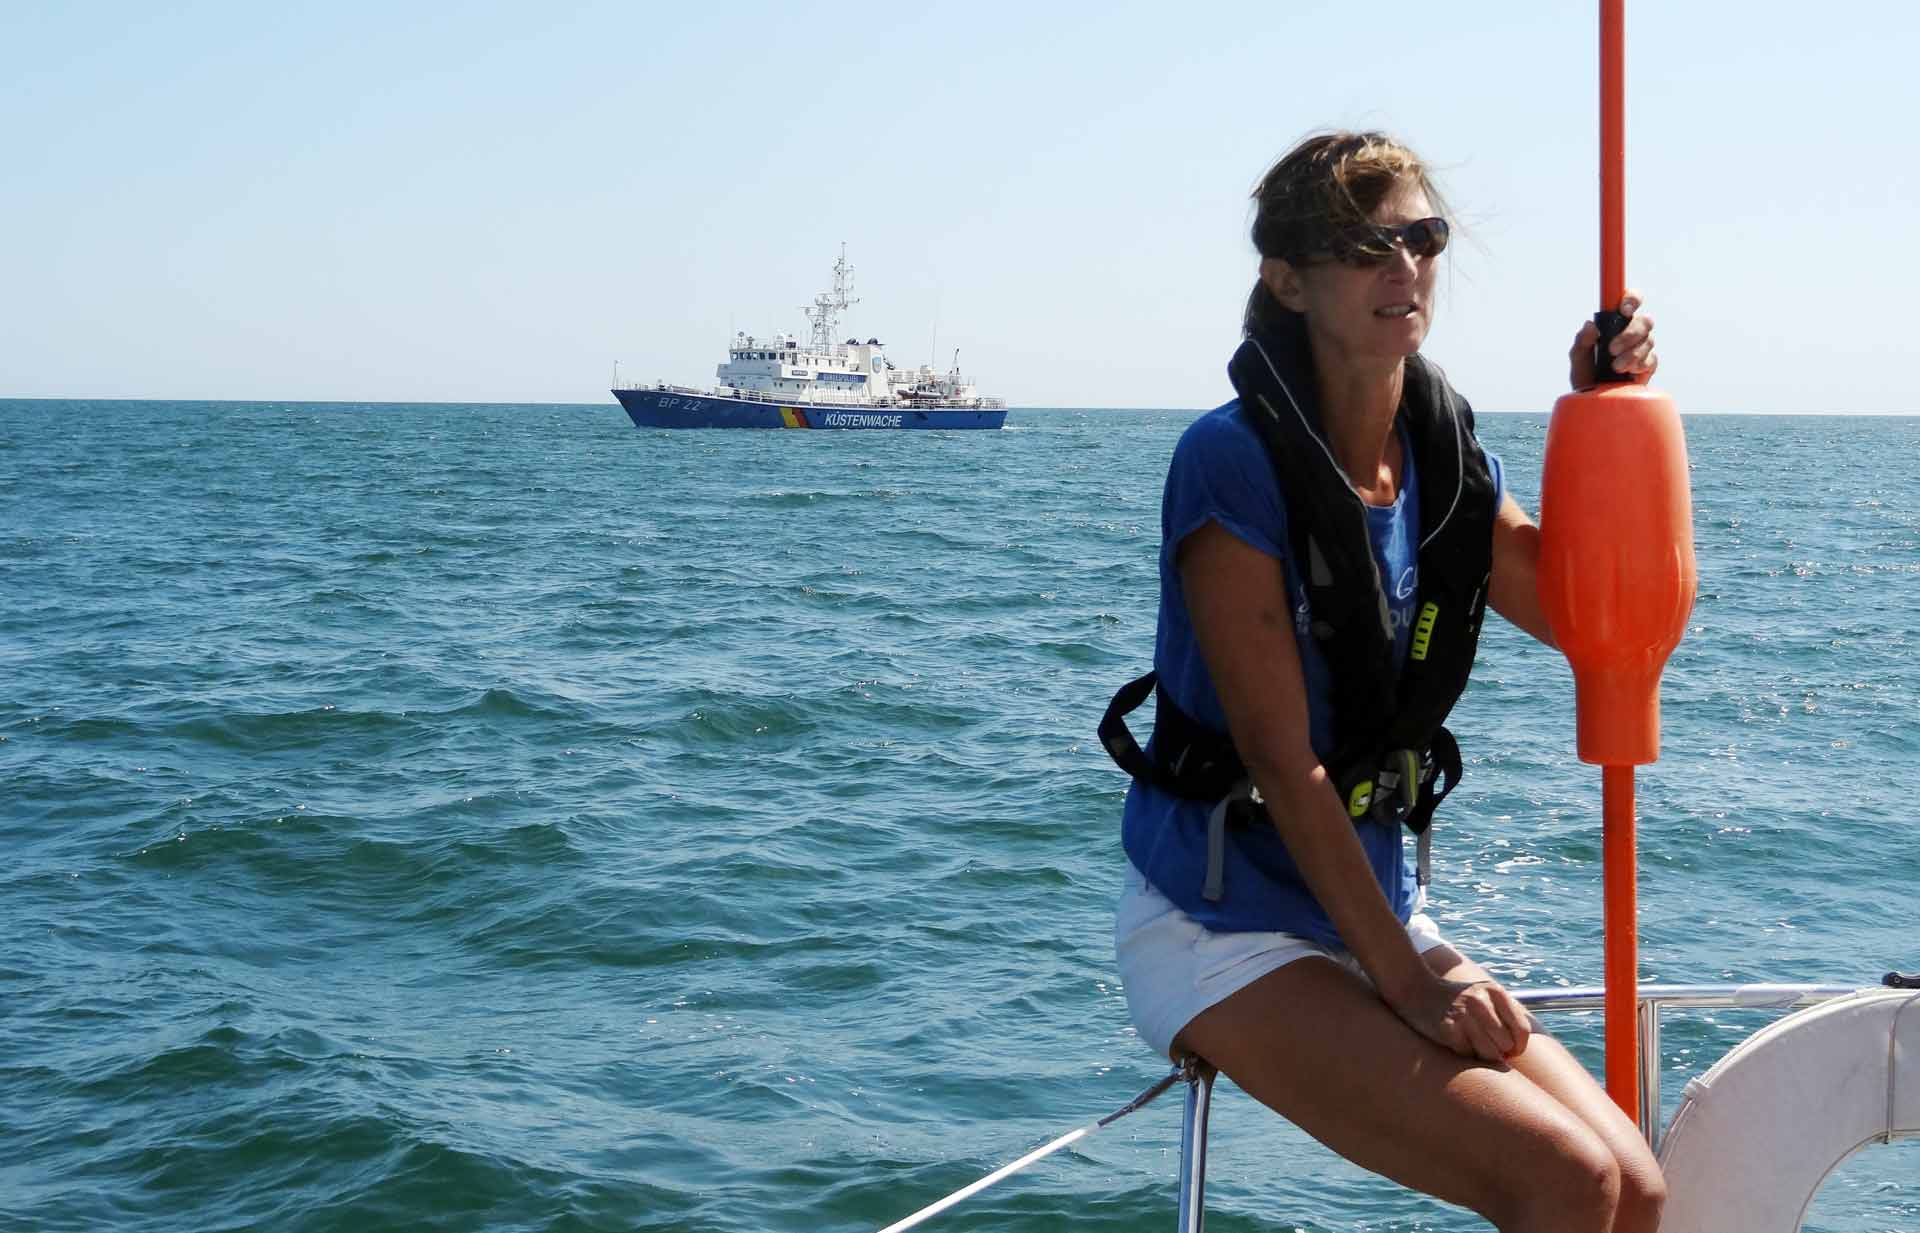 Andrea will push the buoy off whenever Dietmar nods. Even Coast Guard will be surprised ...